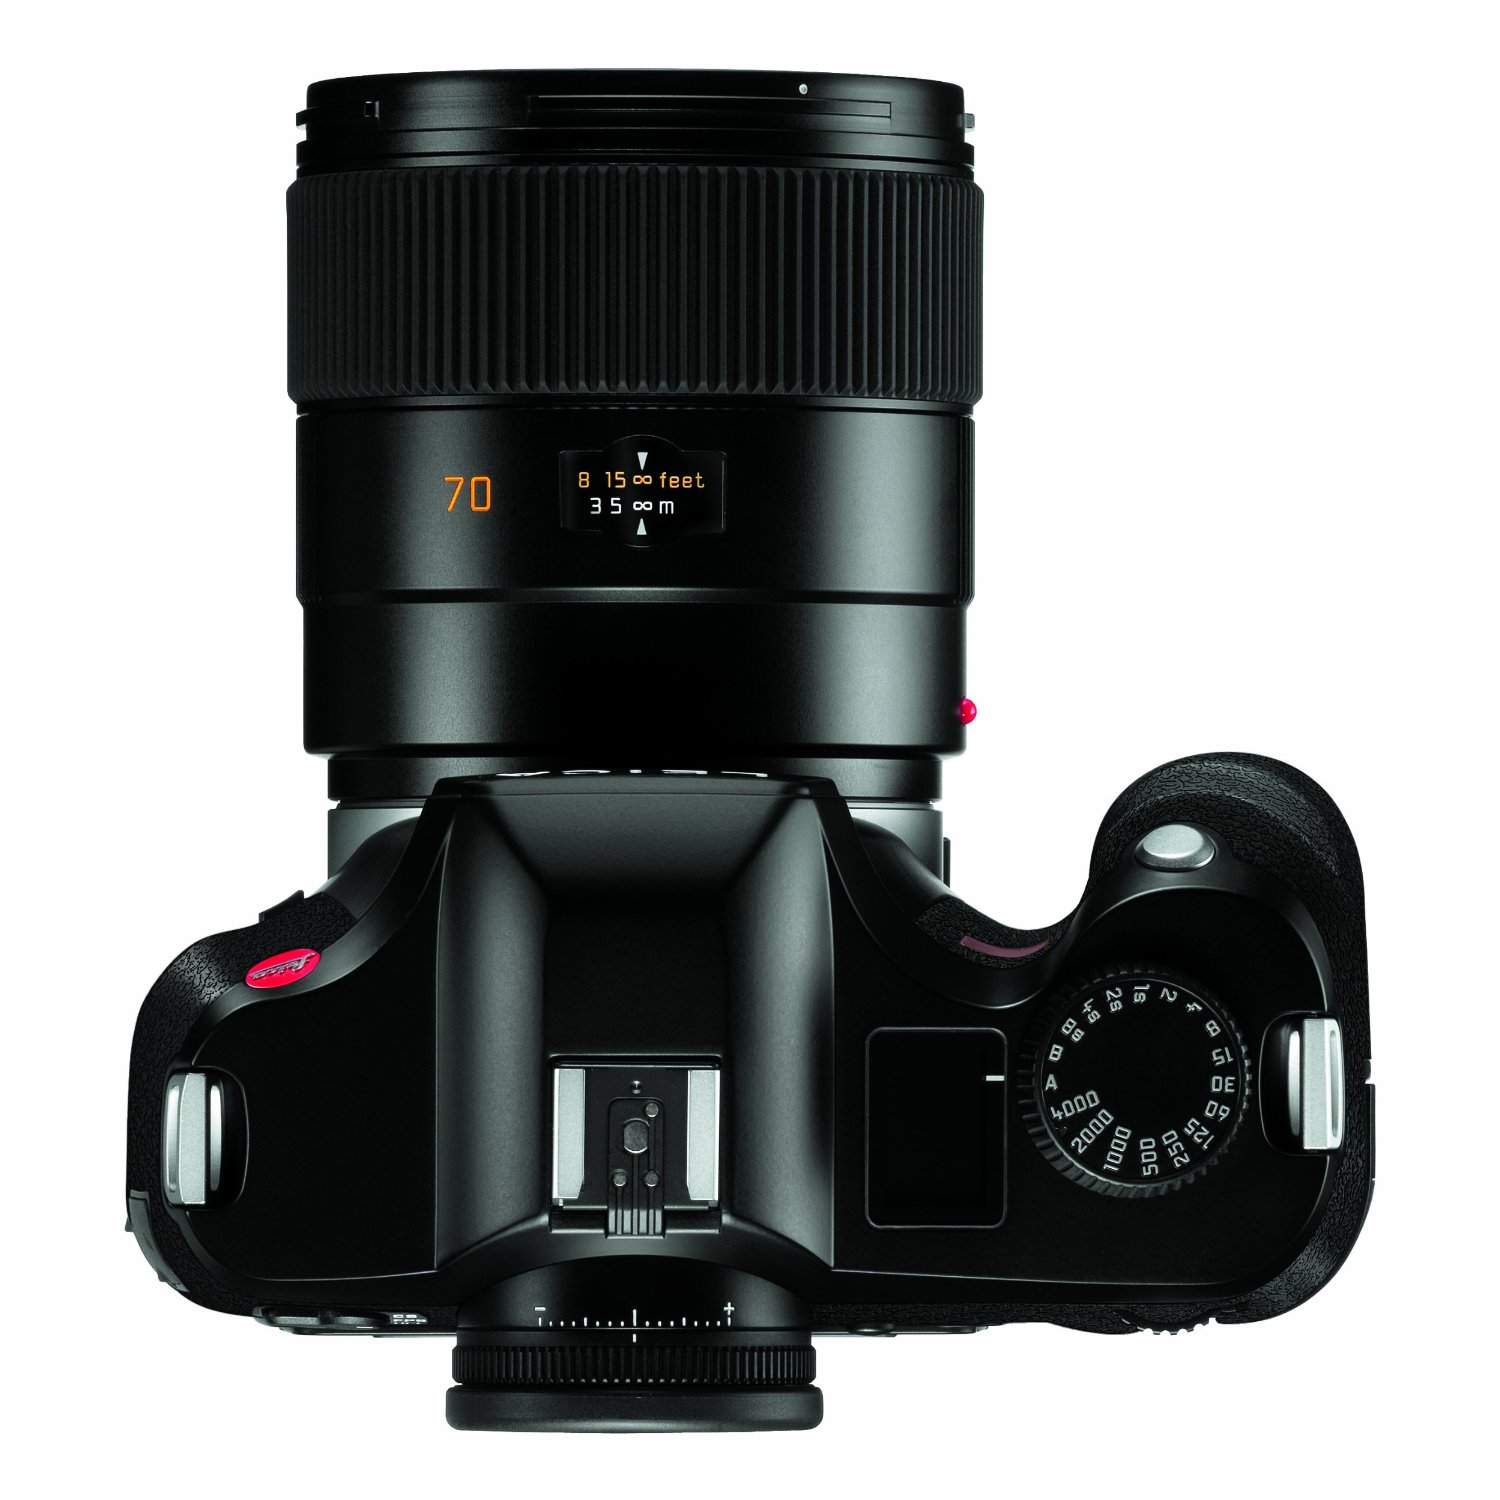 http://thetechjournal.com/wp-content/uploads/images/1109/1316325950-leica-s2-375mp-interchangeable-lens-camera-cost-28000-6.jpg